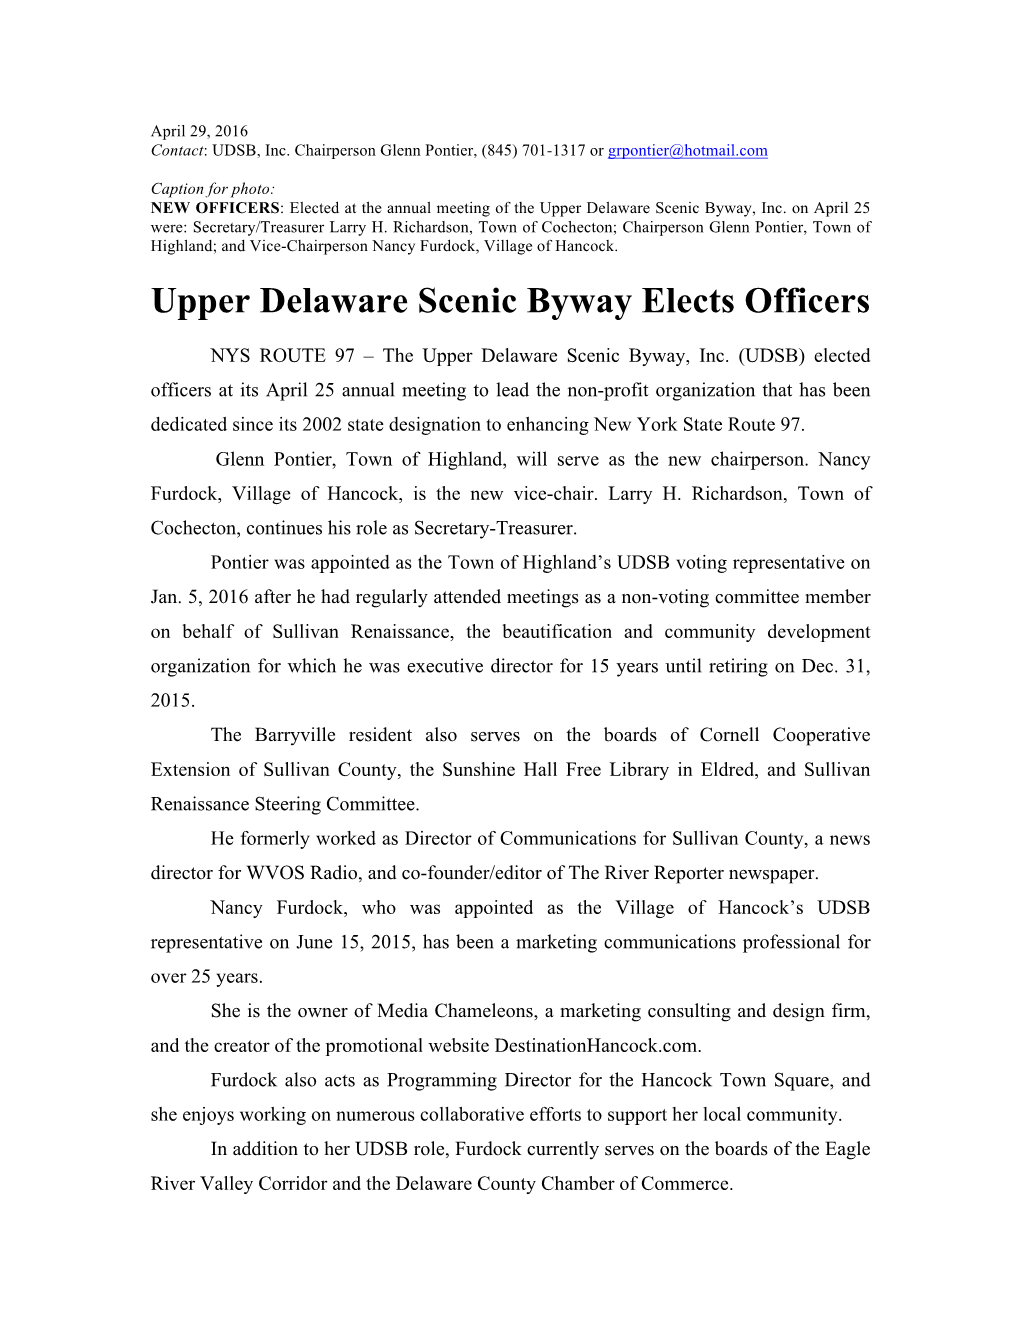 Upper Delaware Scenic Byway Elects Officers